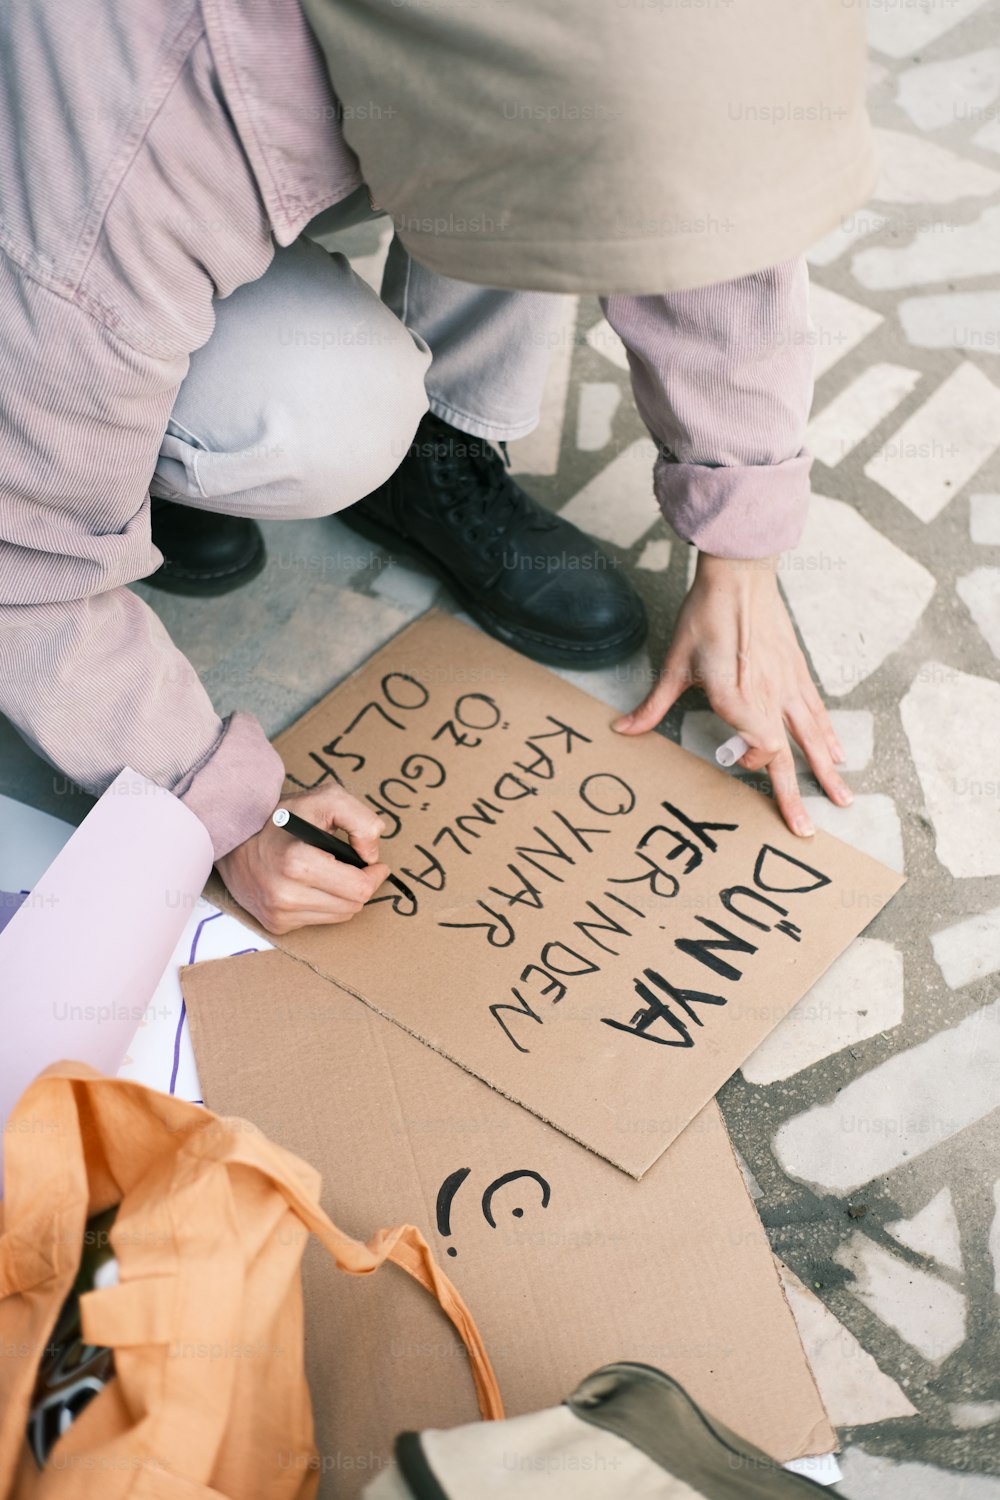 a man is writing on a cardboard sign